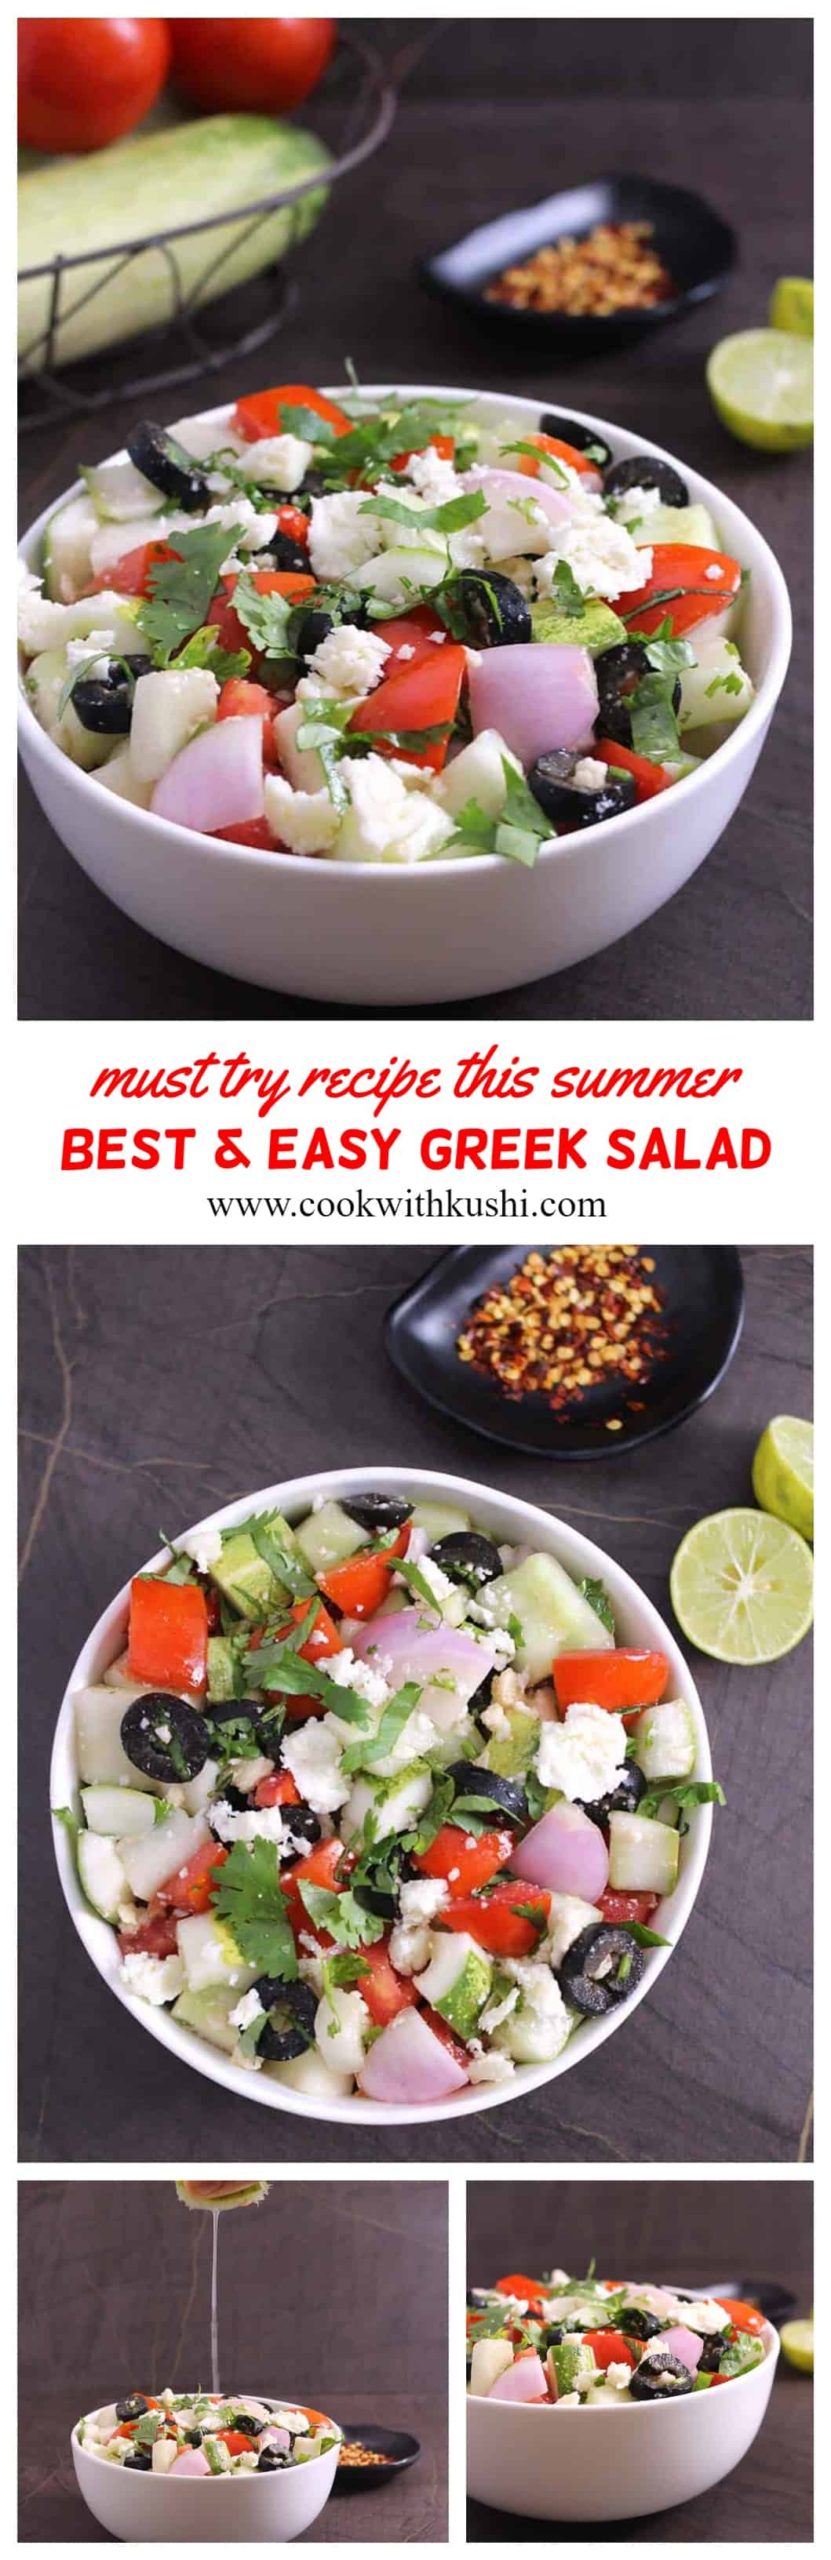 This Greek Salad is one of the best and easy, refreshing and cooling salad recipe you will try this summer. This is one of my favorite summer side dish. #salad #summersalad #rainbowsalad #healthyrecipes #dinnersides #vegetarianmeal #veganmeal #ketorecipes #Lunchideas #summerfood #bbq #4thofjuly #fourthofjuly #mediterranean